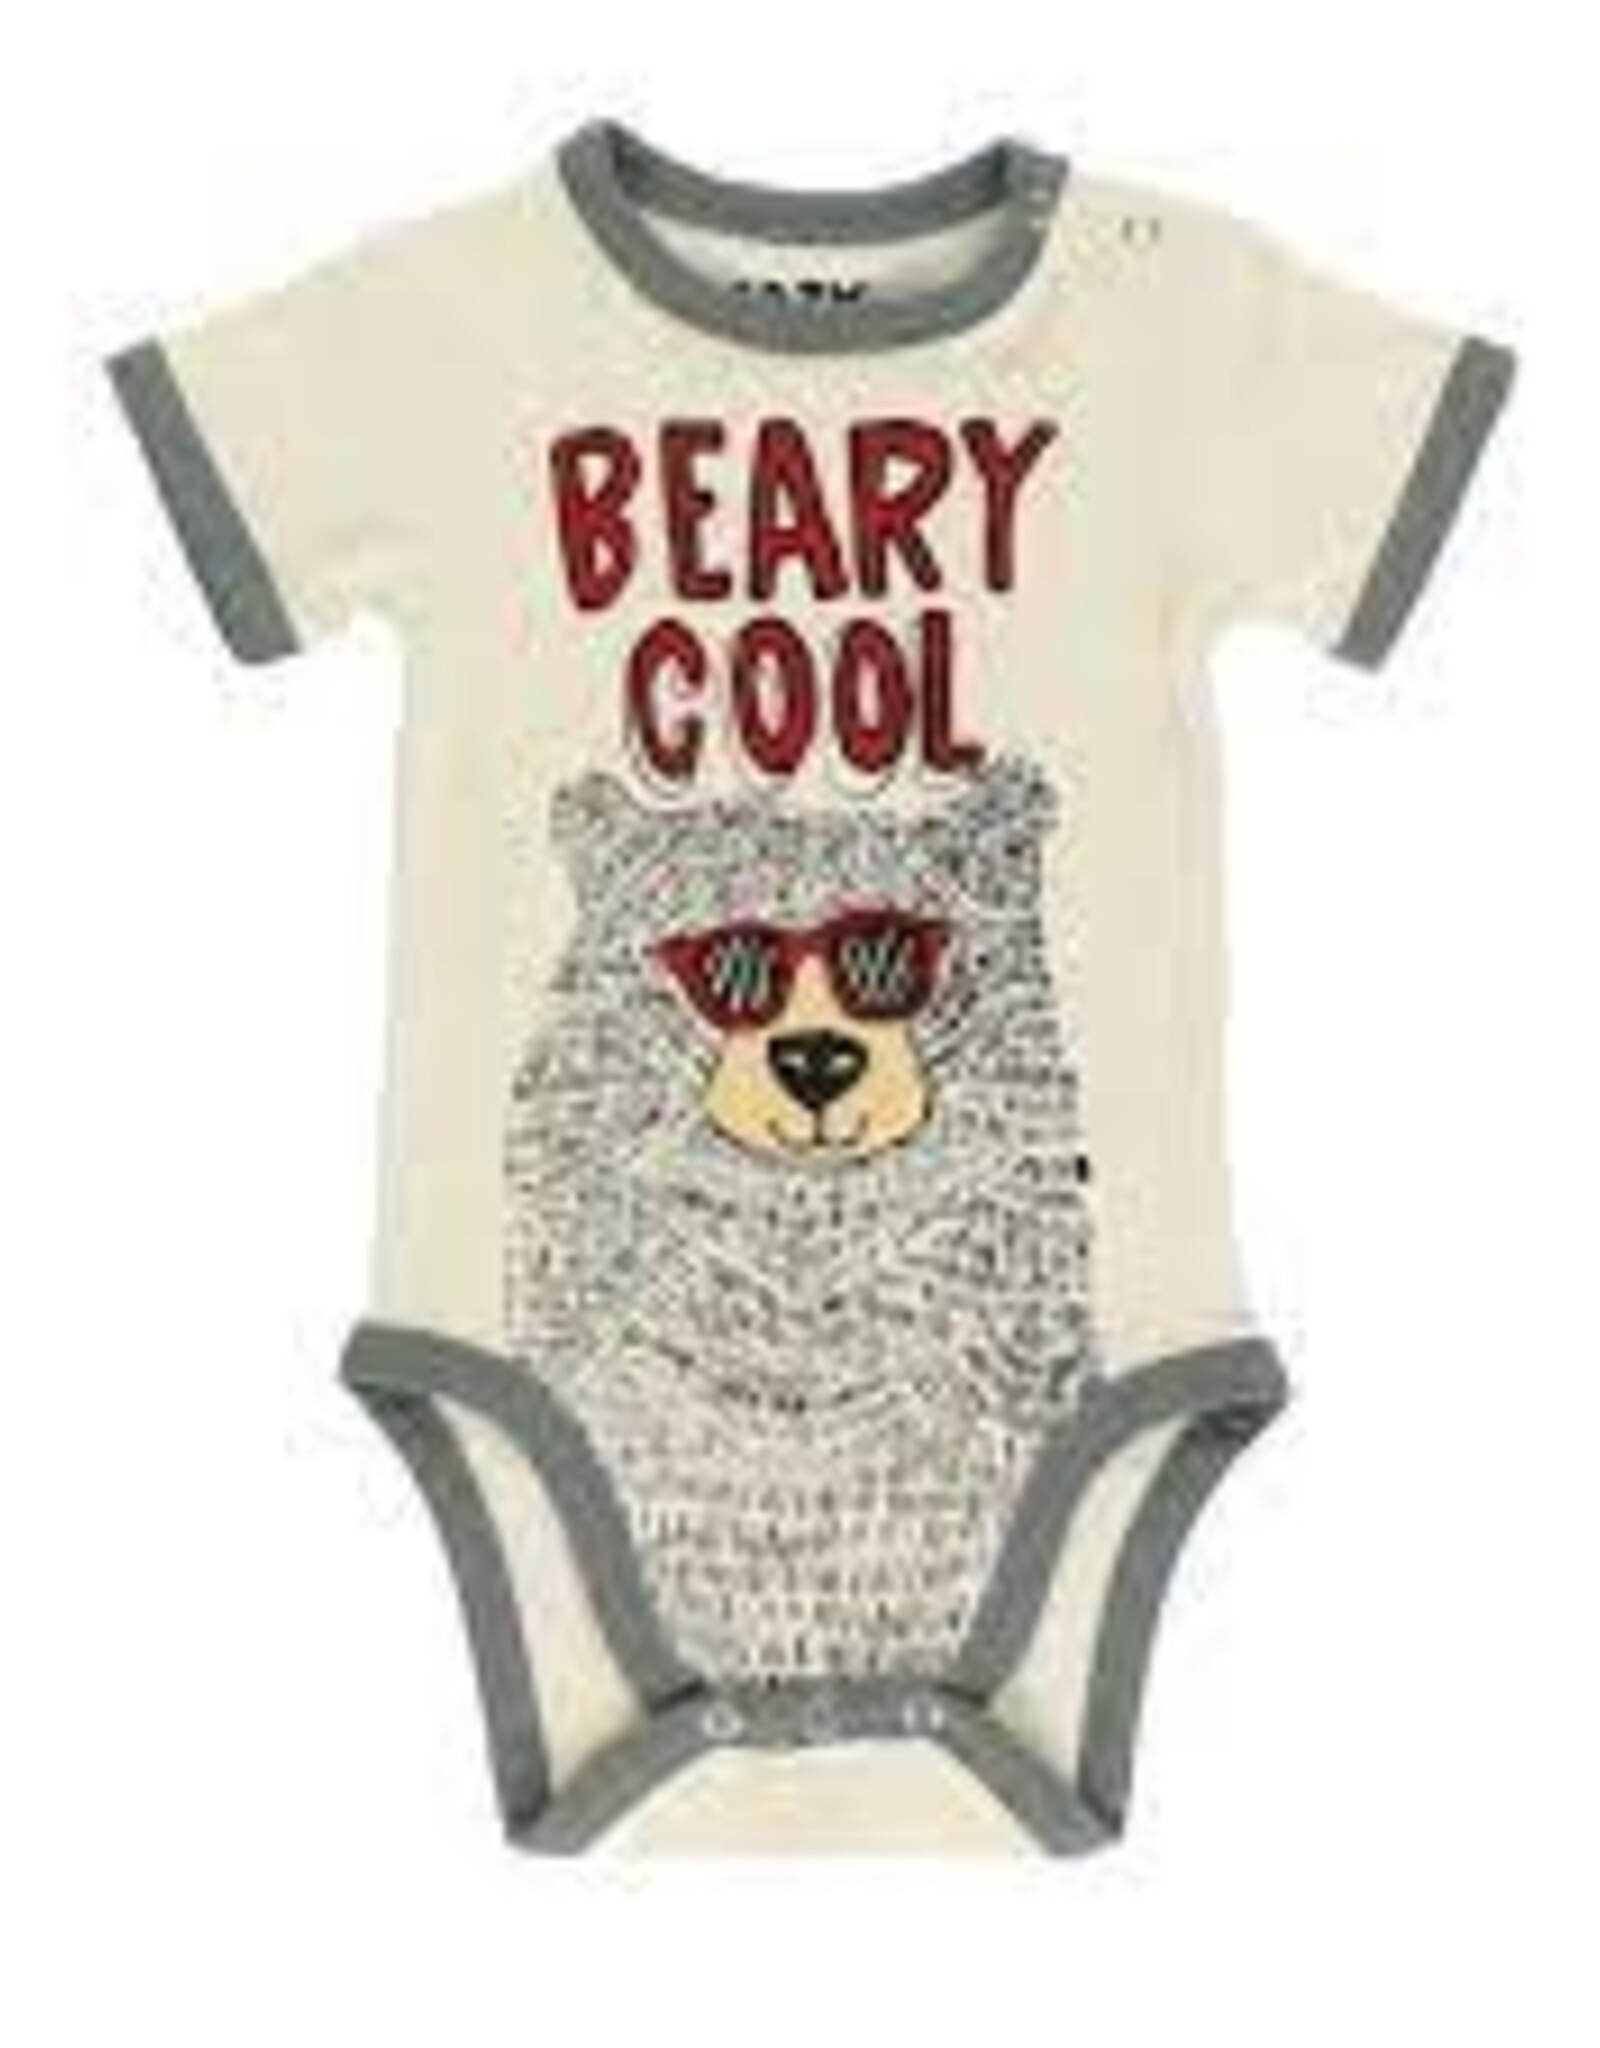 Kids Copy of Lazy One - Infant Creeper Onesie  New to the Herd  (18MO)